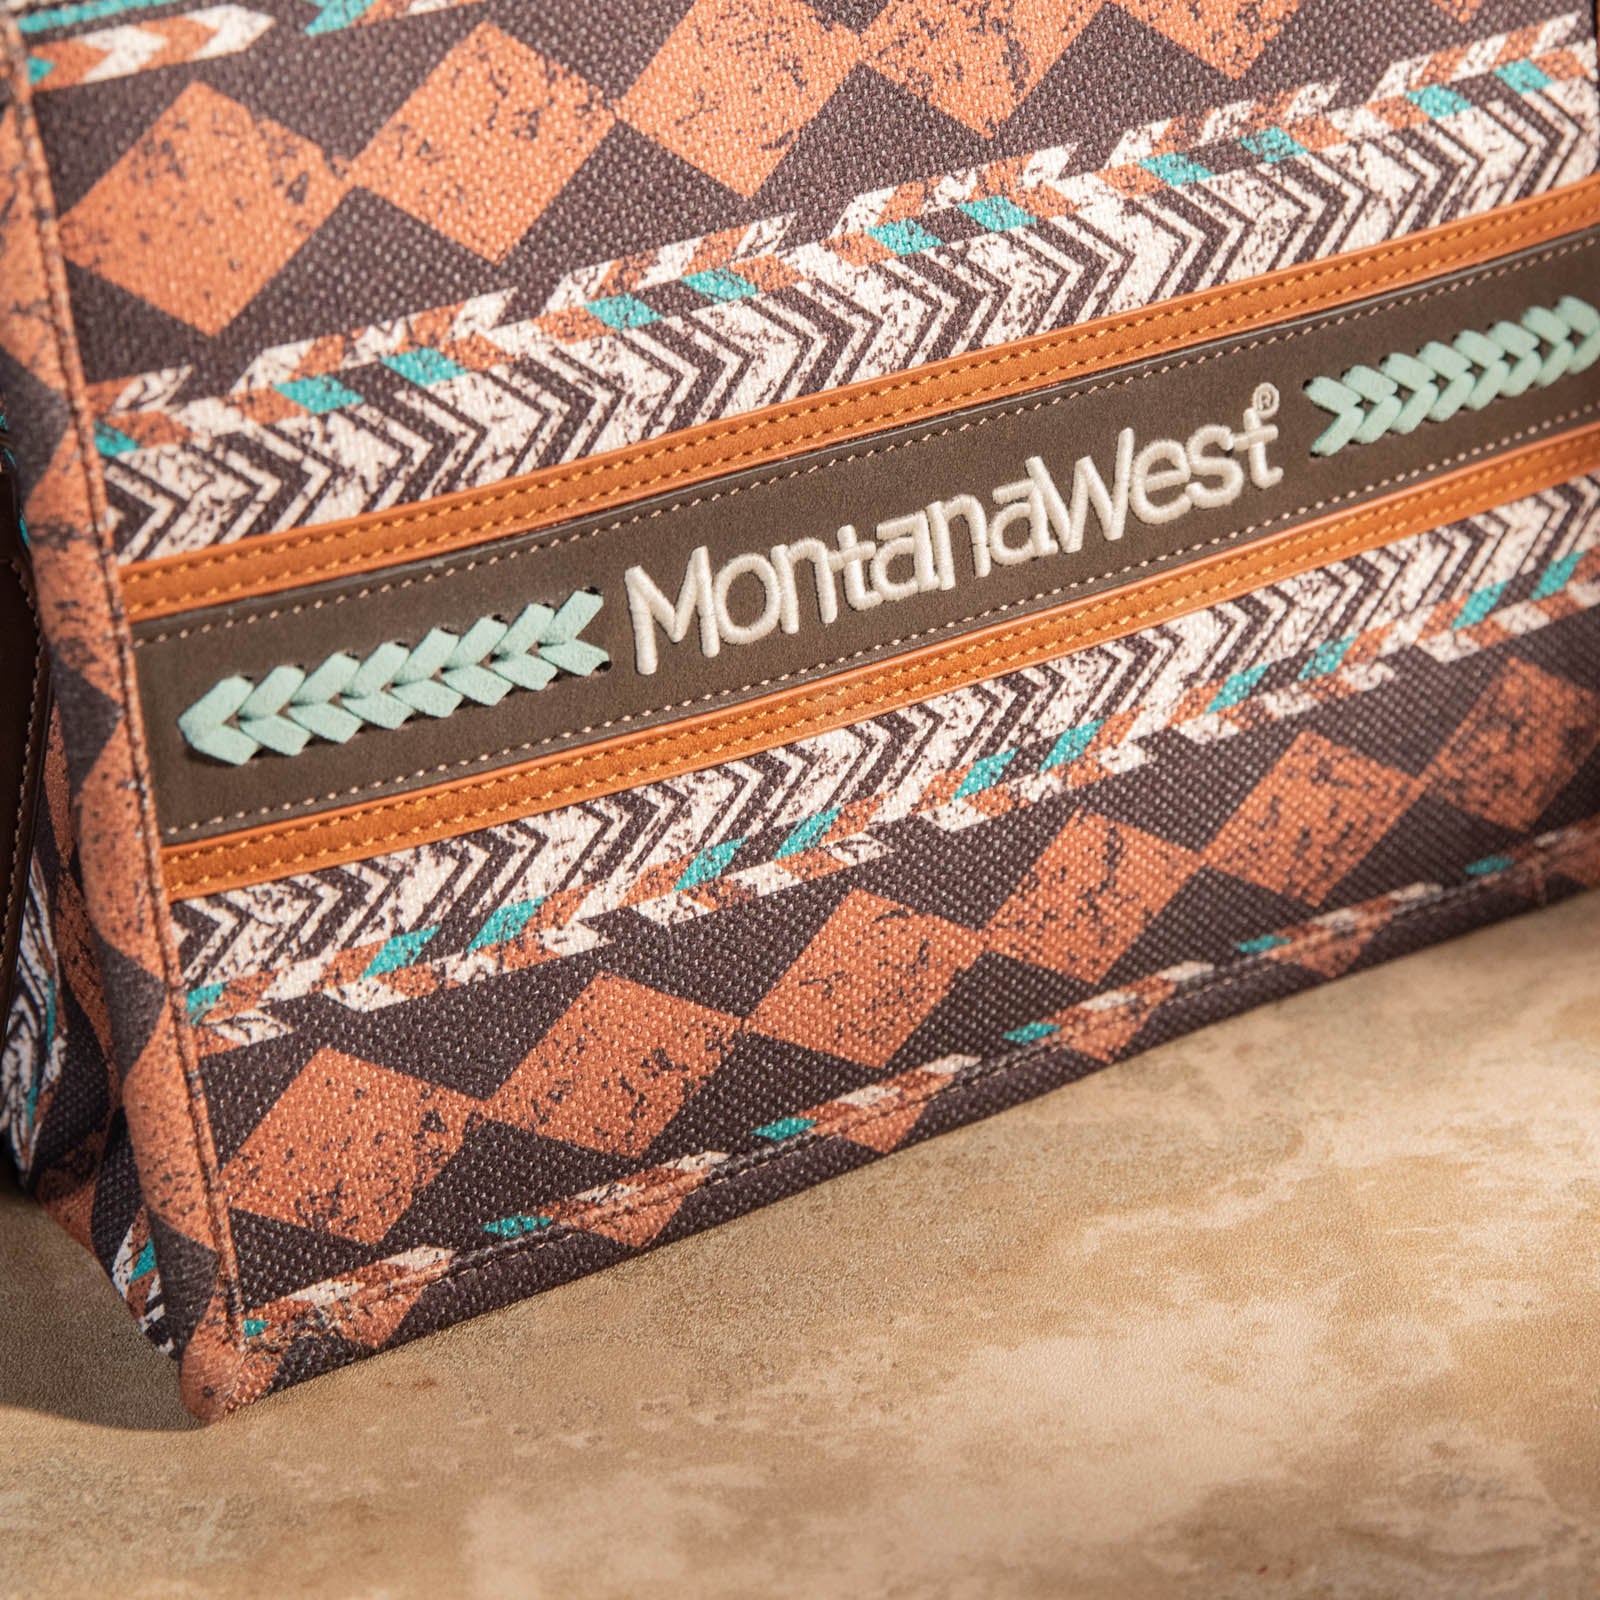 Montana West Boho Aztec Dual Sided Print Concealed Carry Canvas Tote/Crossbody Bag - Cowgirl Wear